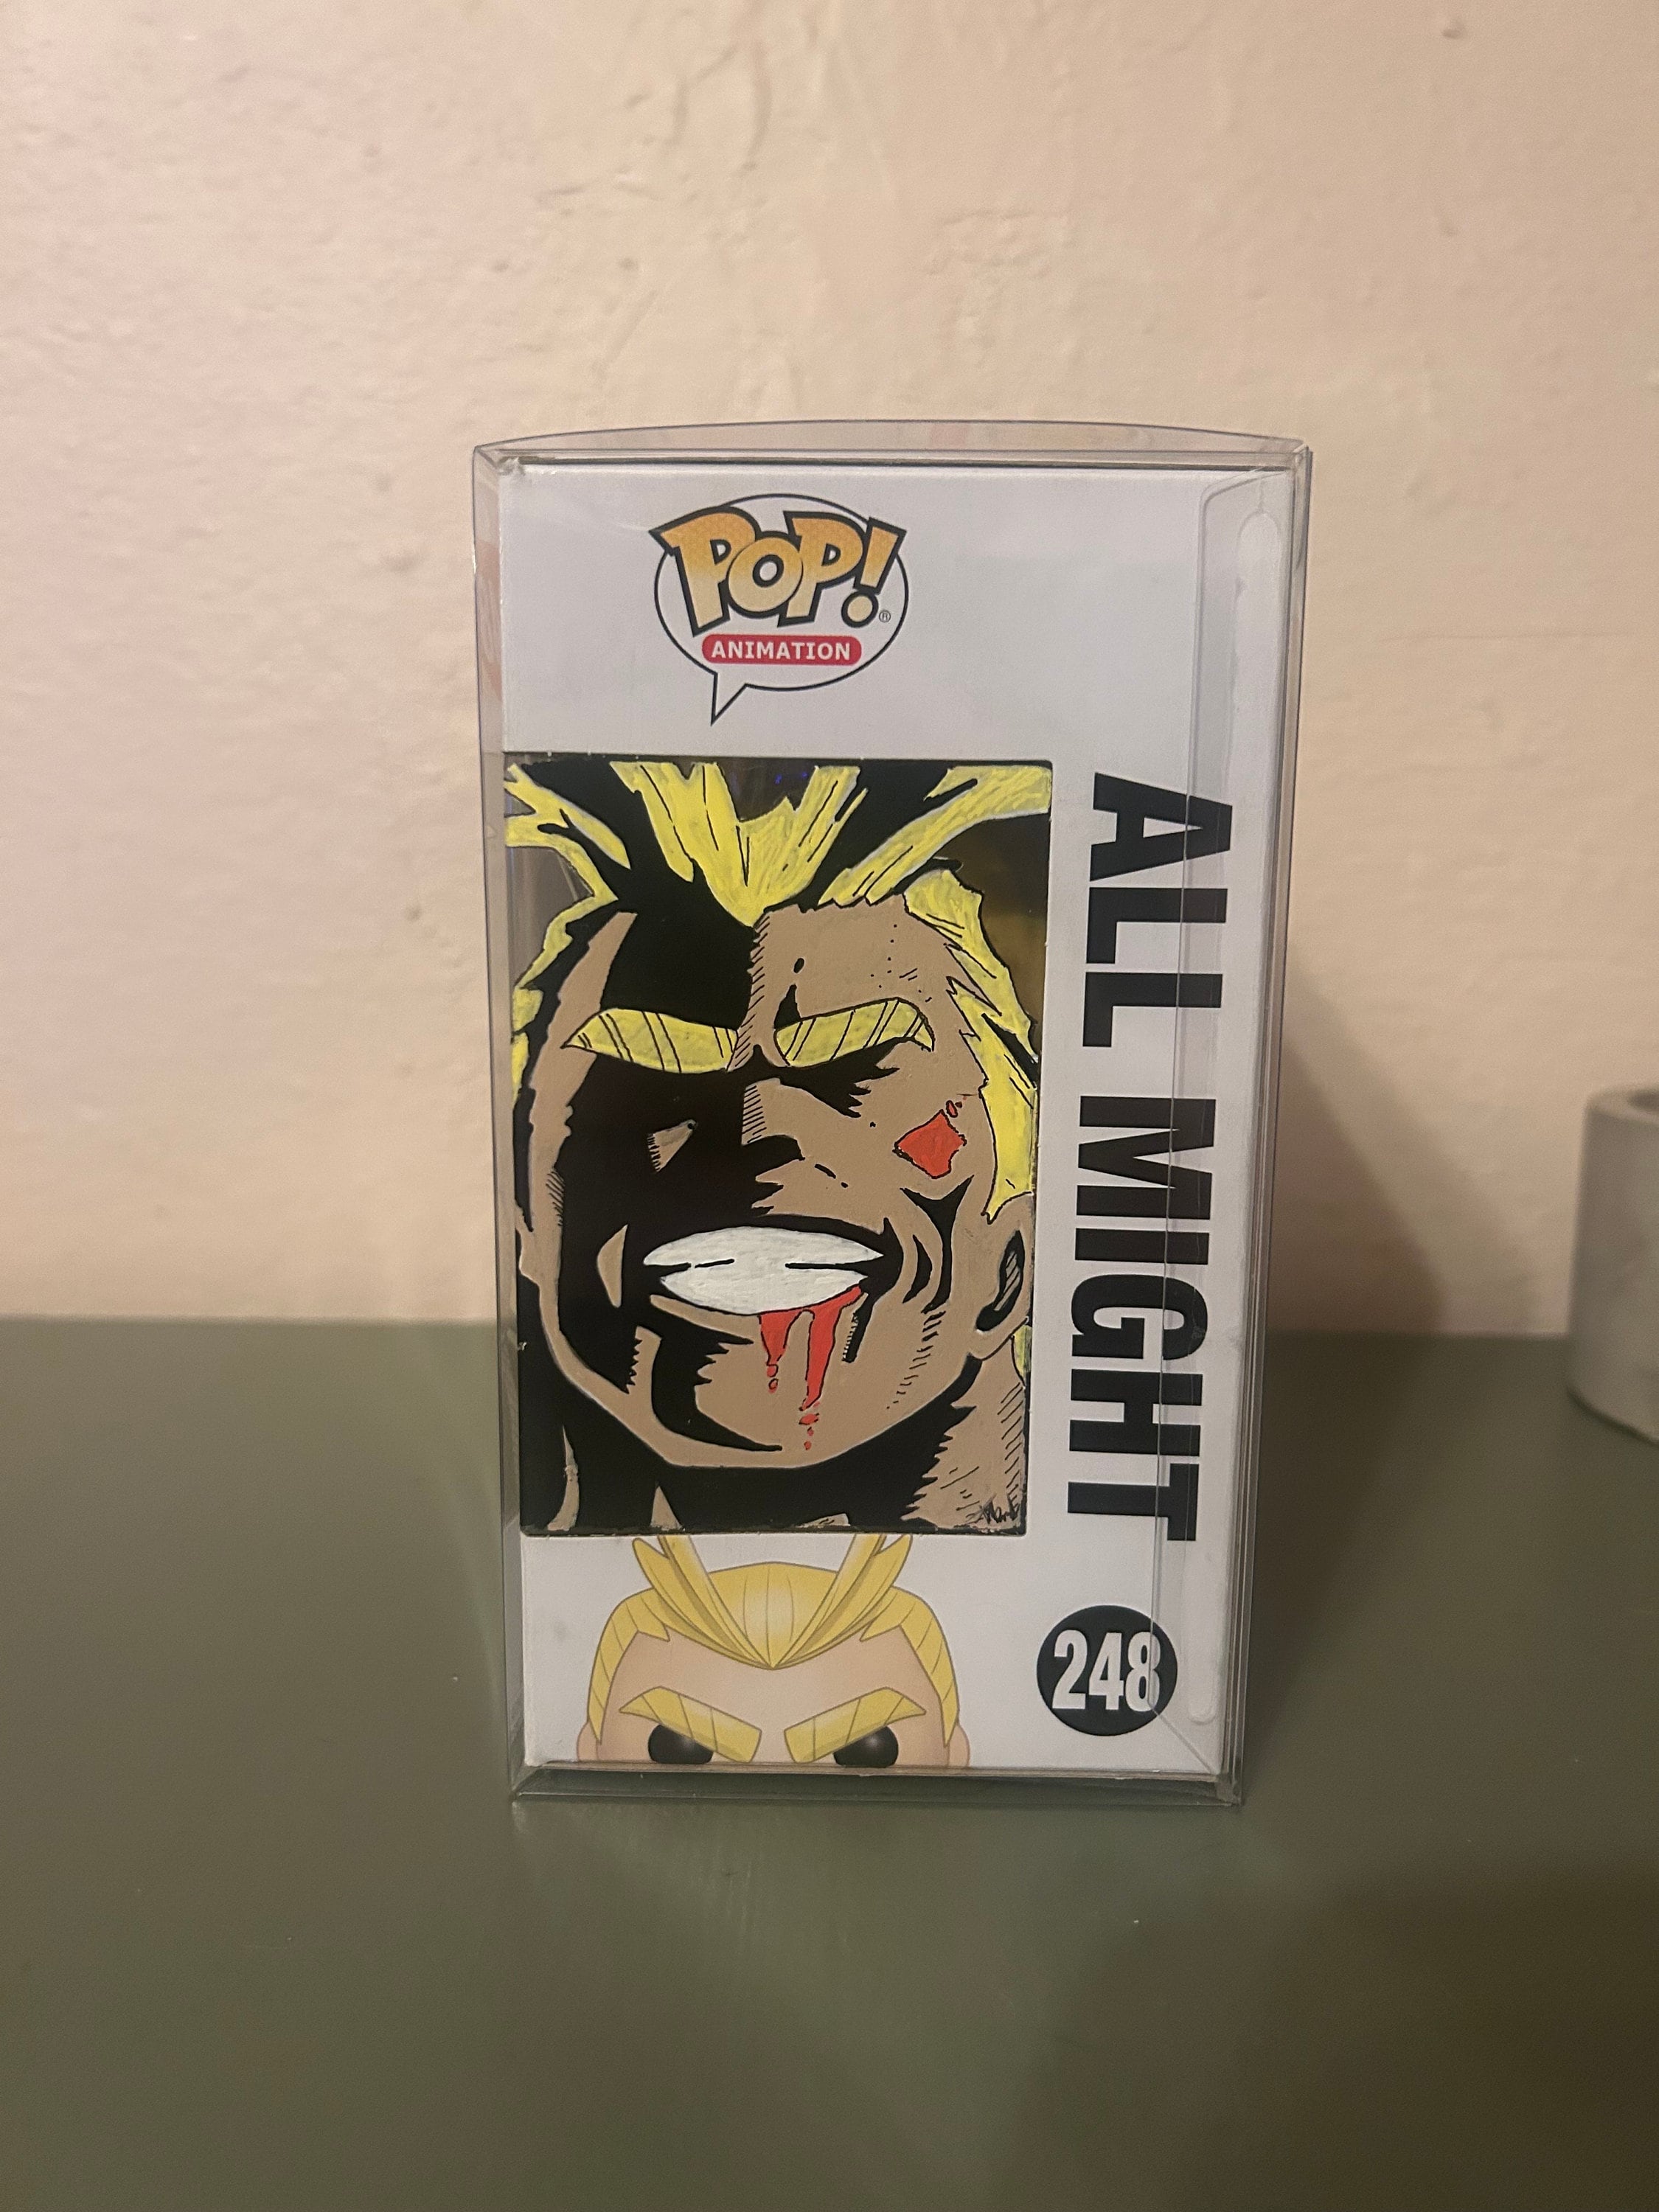 My Hero Academia All Might Plus Ultra Beret